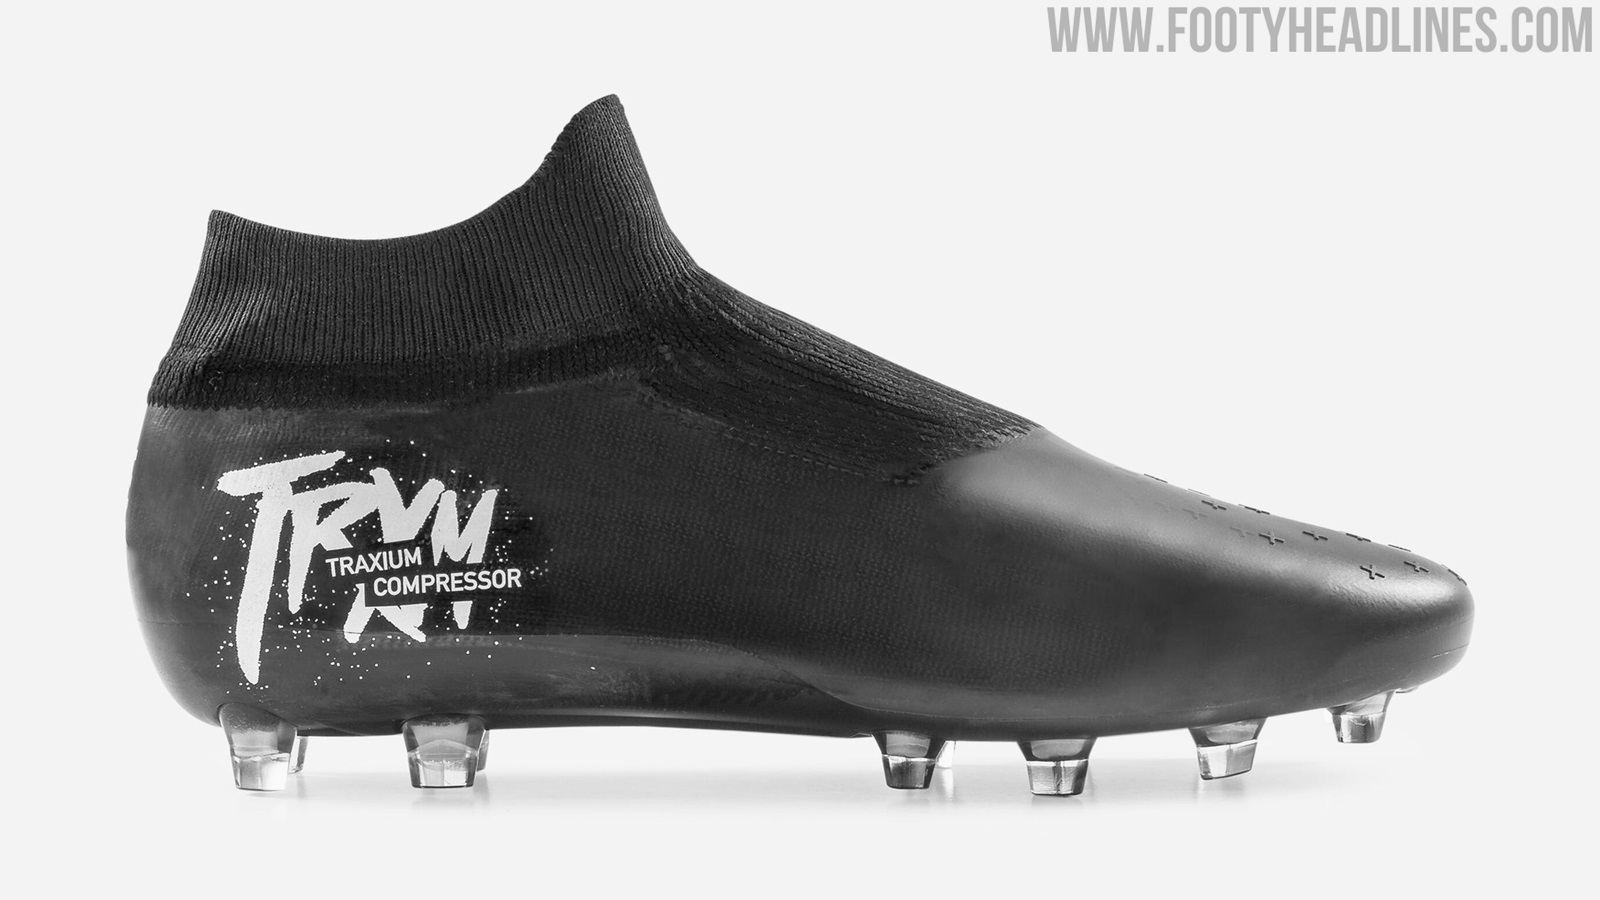 Best football boots for wide feet 2021 | Top 8 picks & Guide by Unisport |